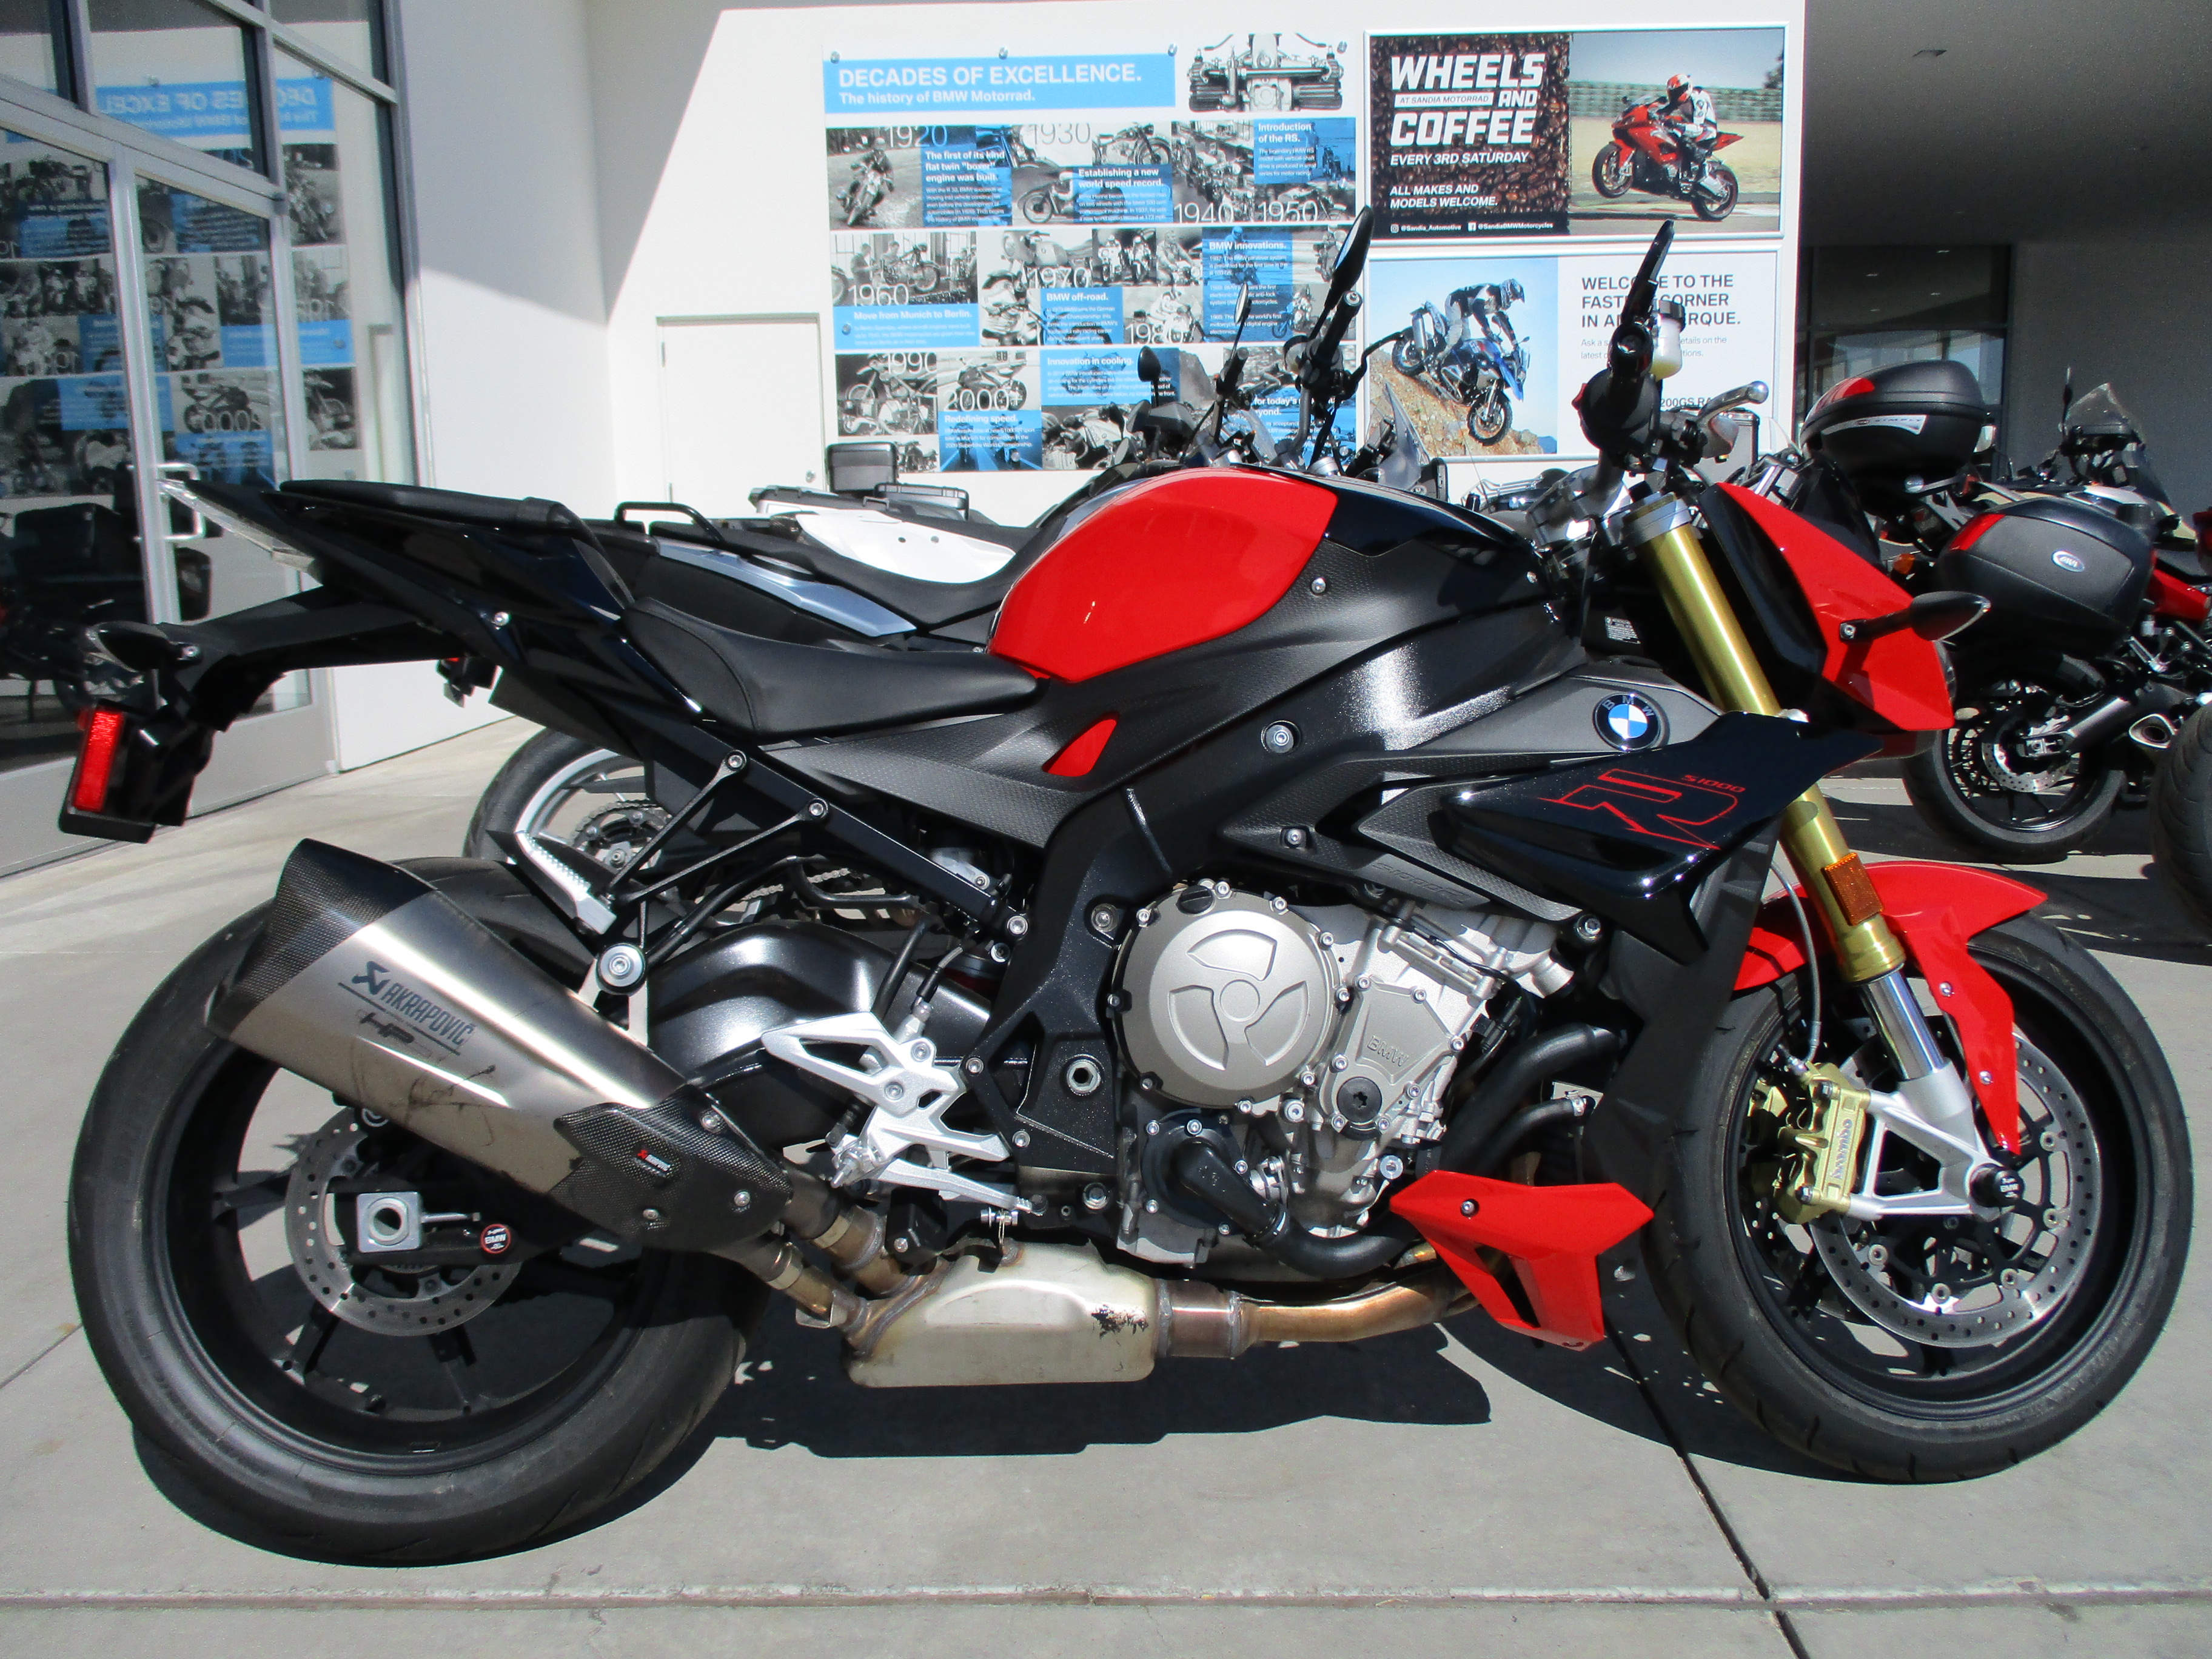 Pre-Owned Motorcycle Inventory - S1000R - Sandia BMW Motorcycles - Albuquerque, NM.